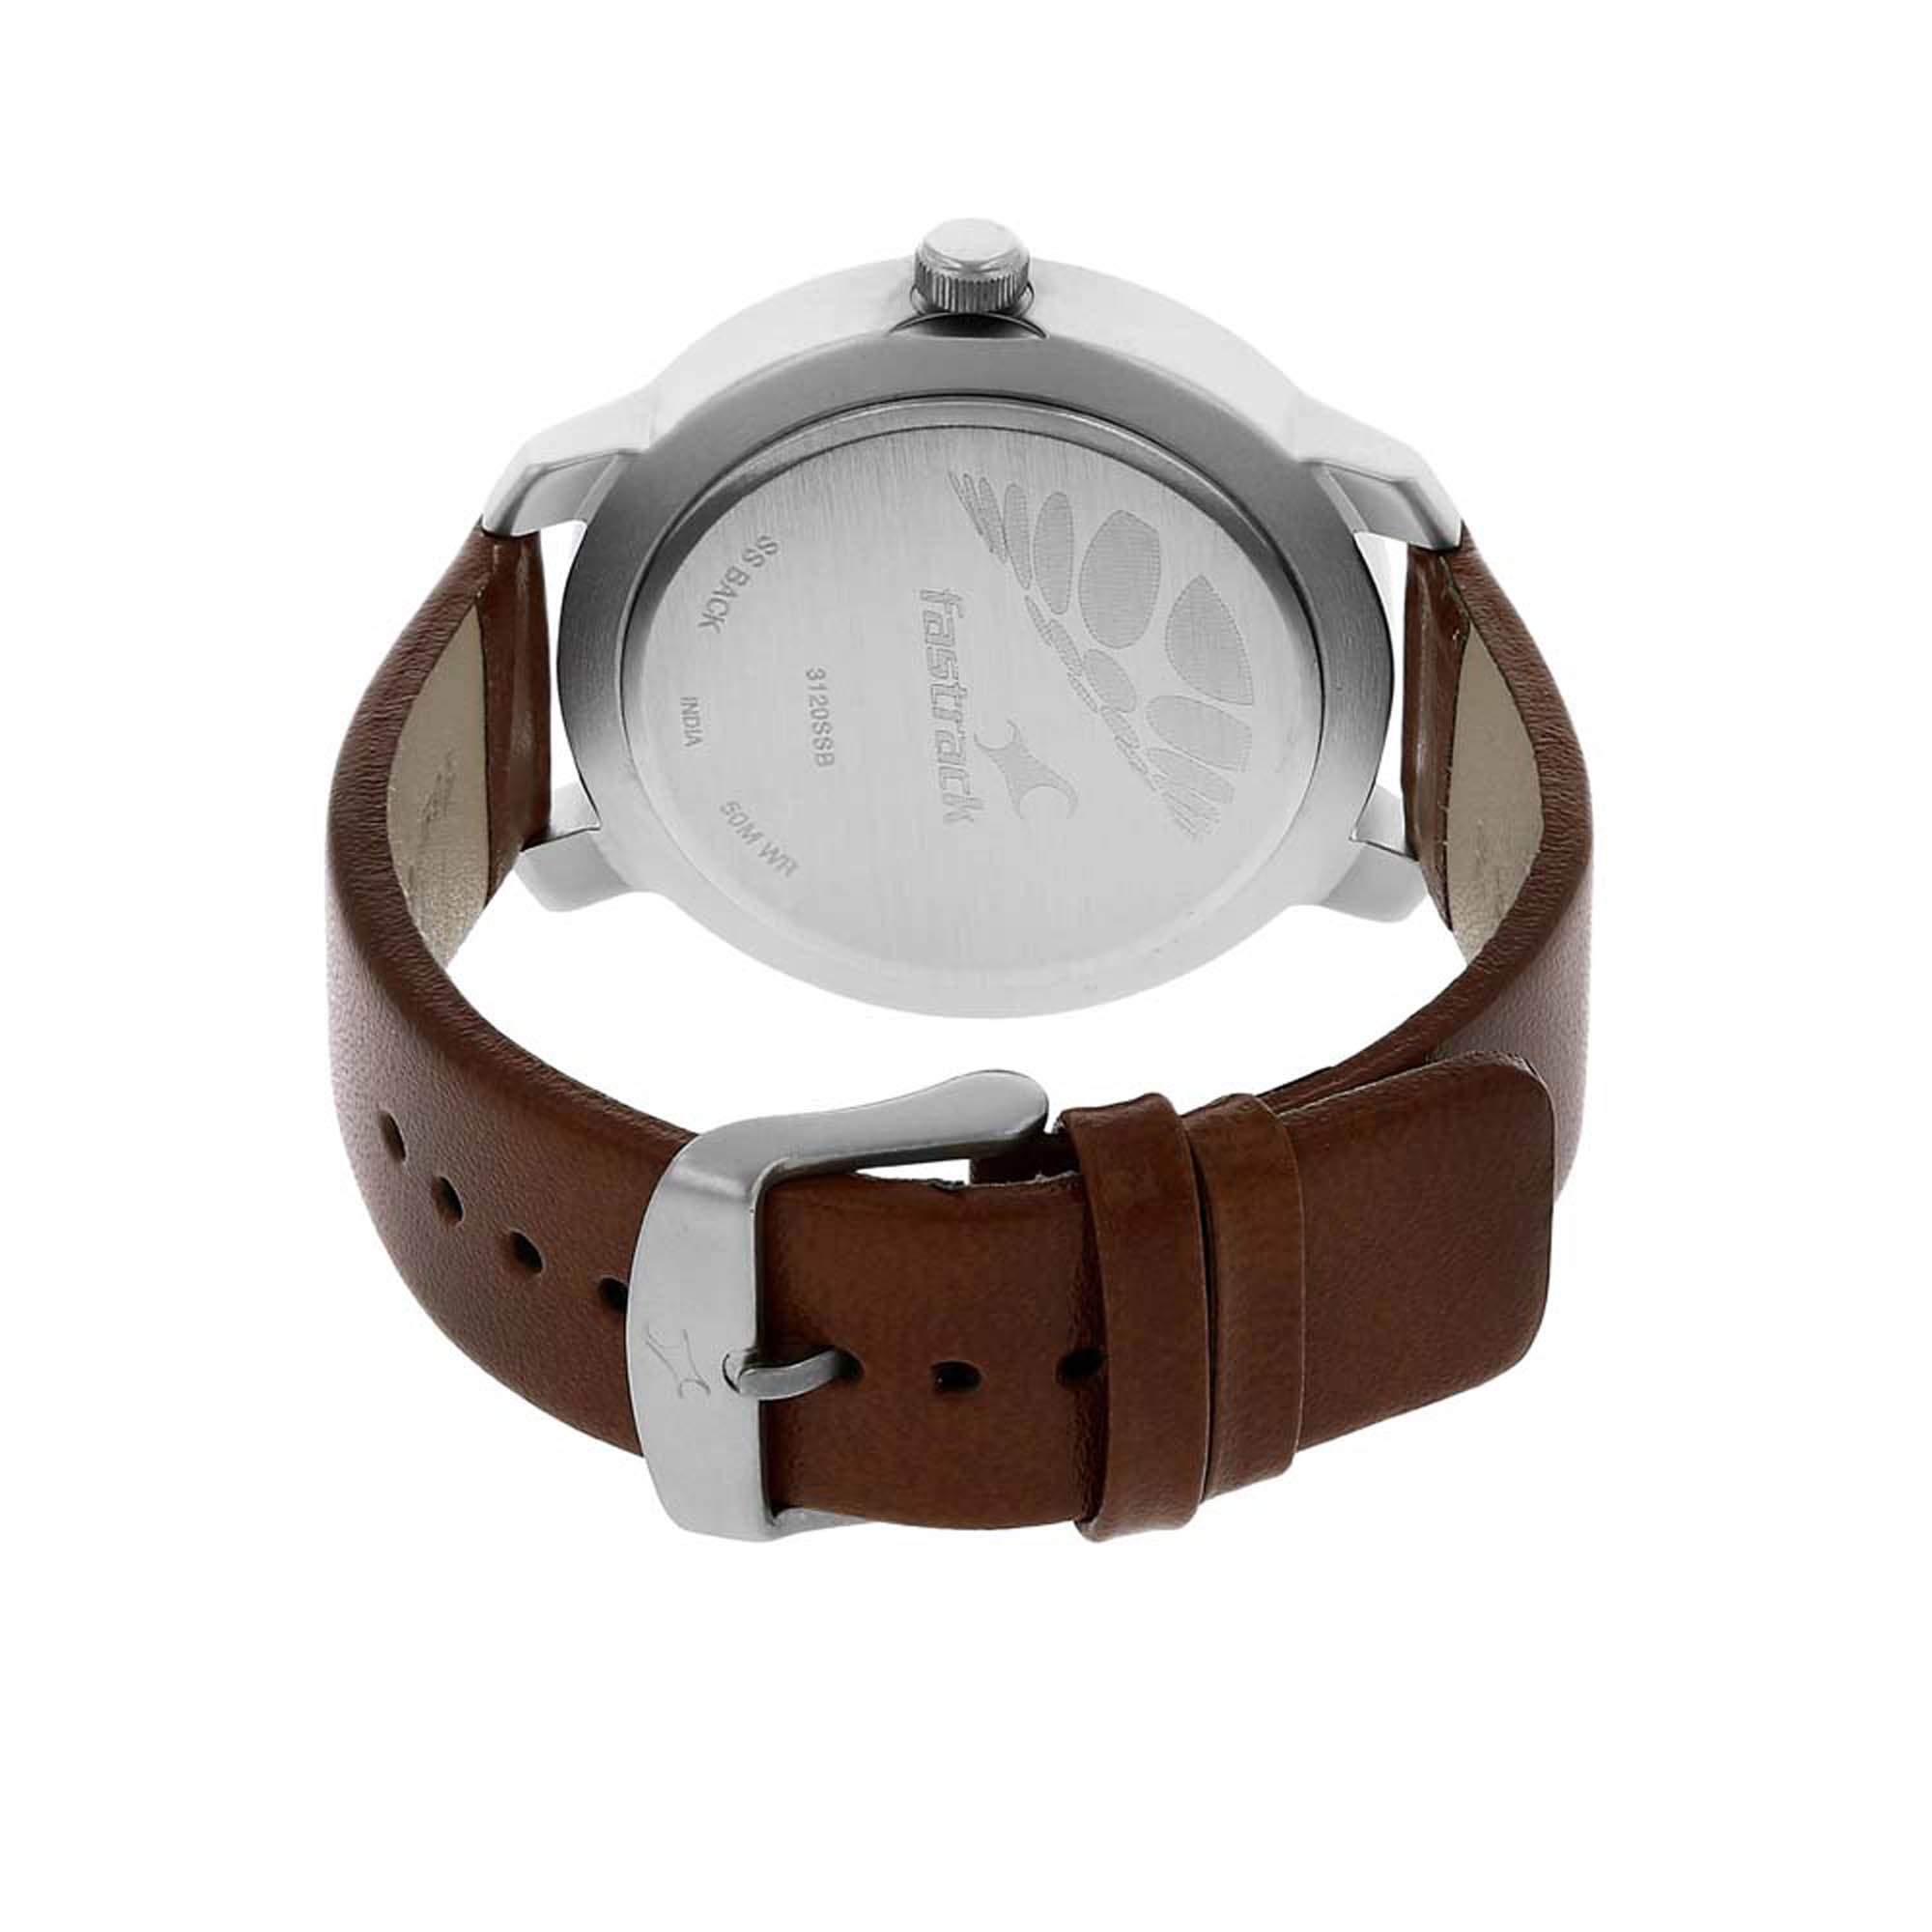 Fastrack Quartz Analog White Dial Leather Strap Watch for Guys